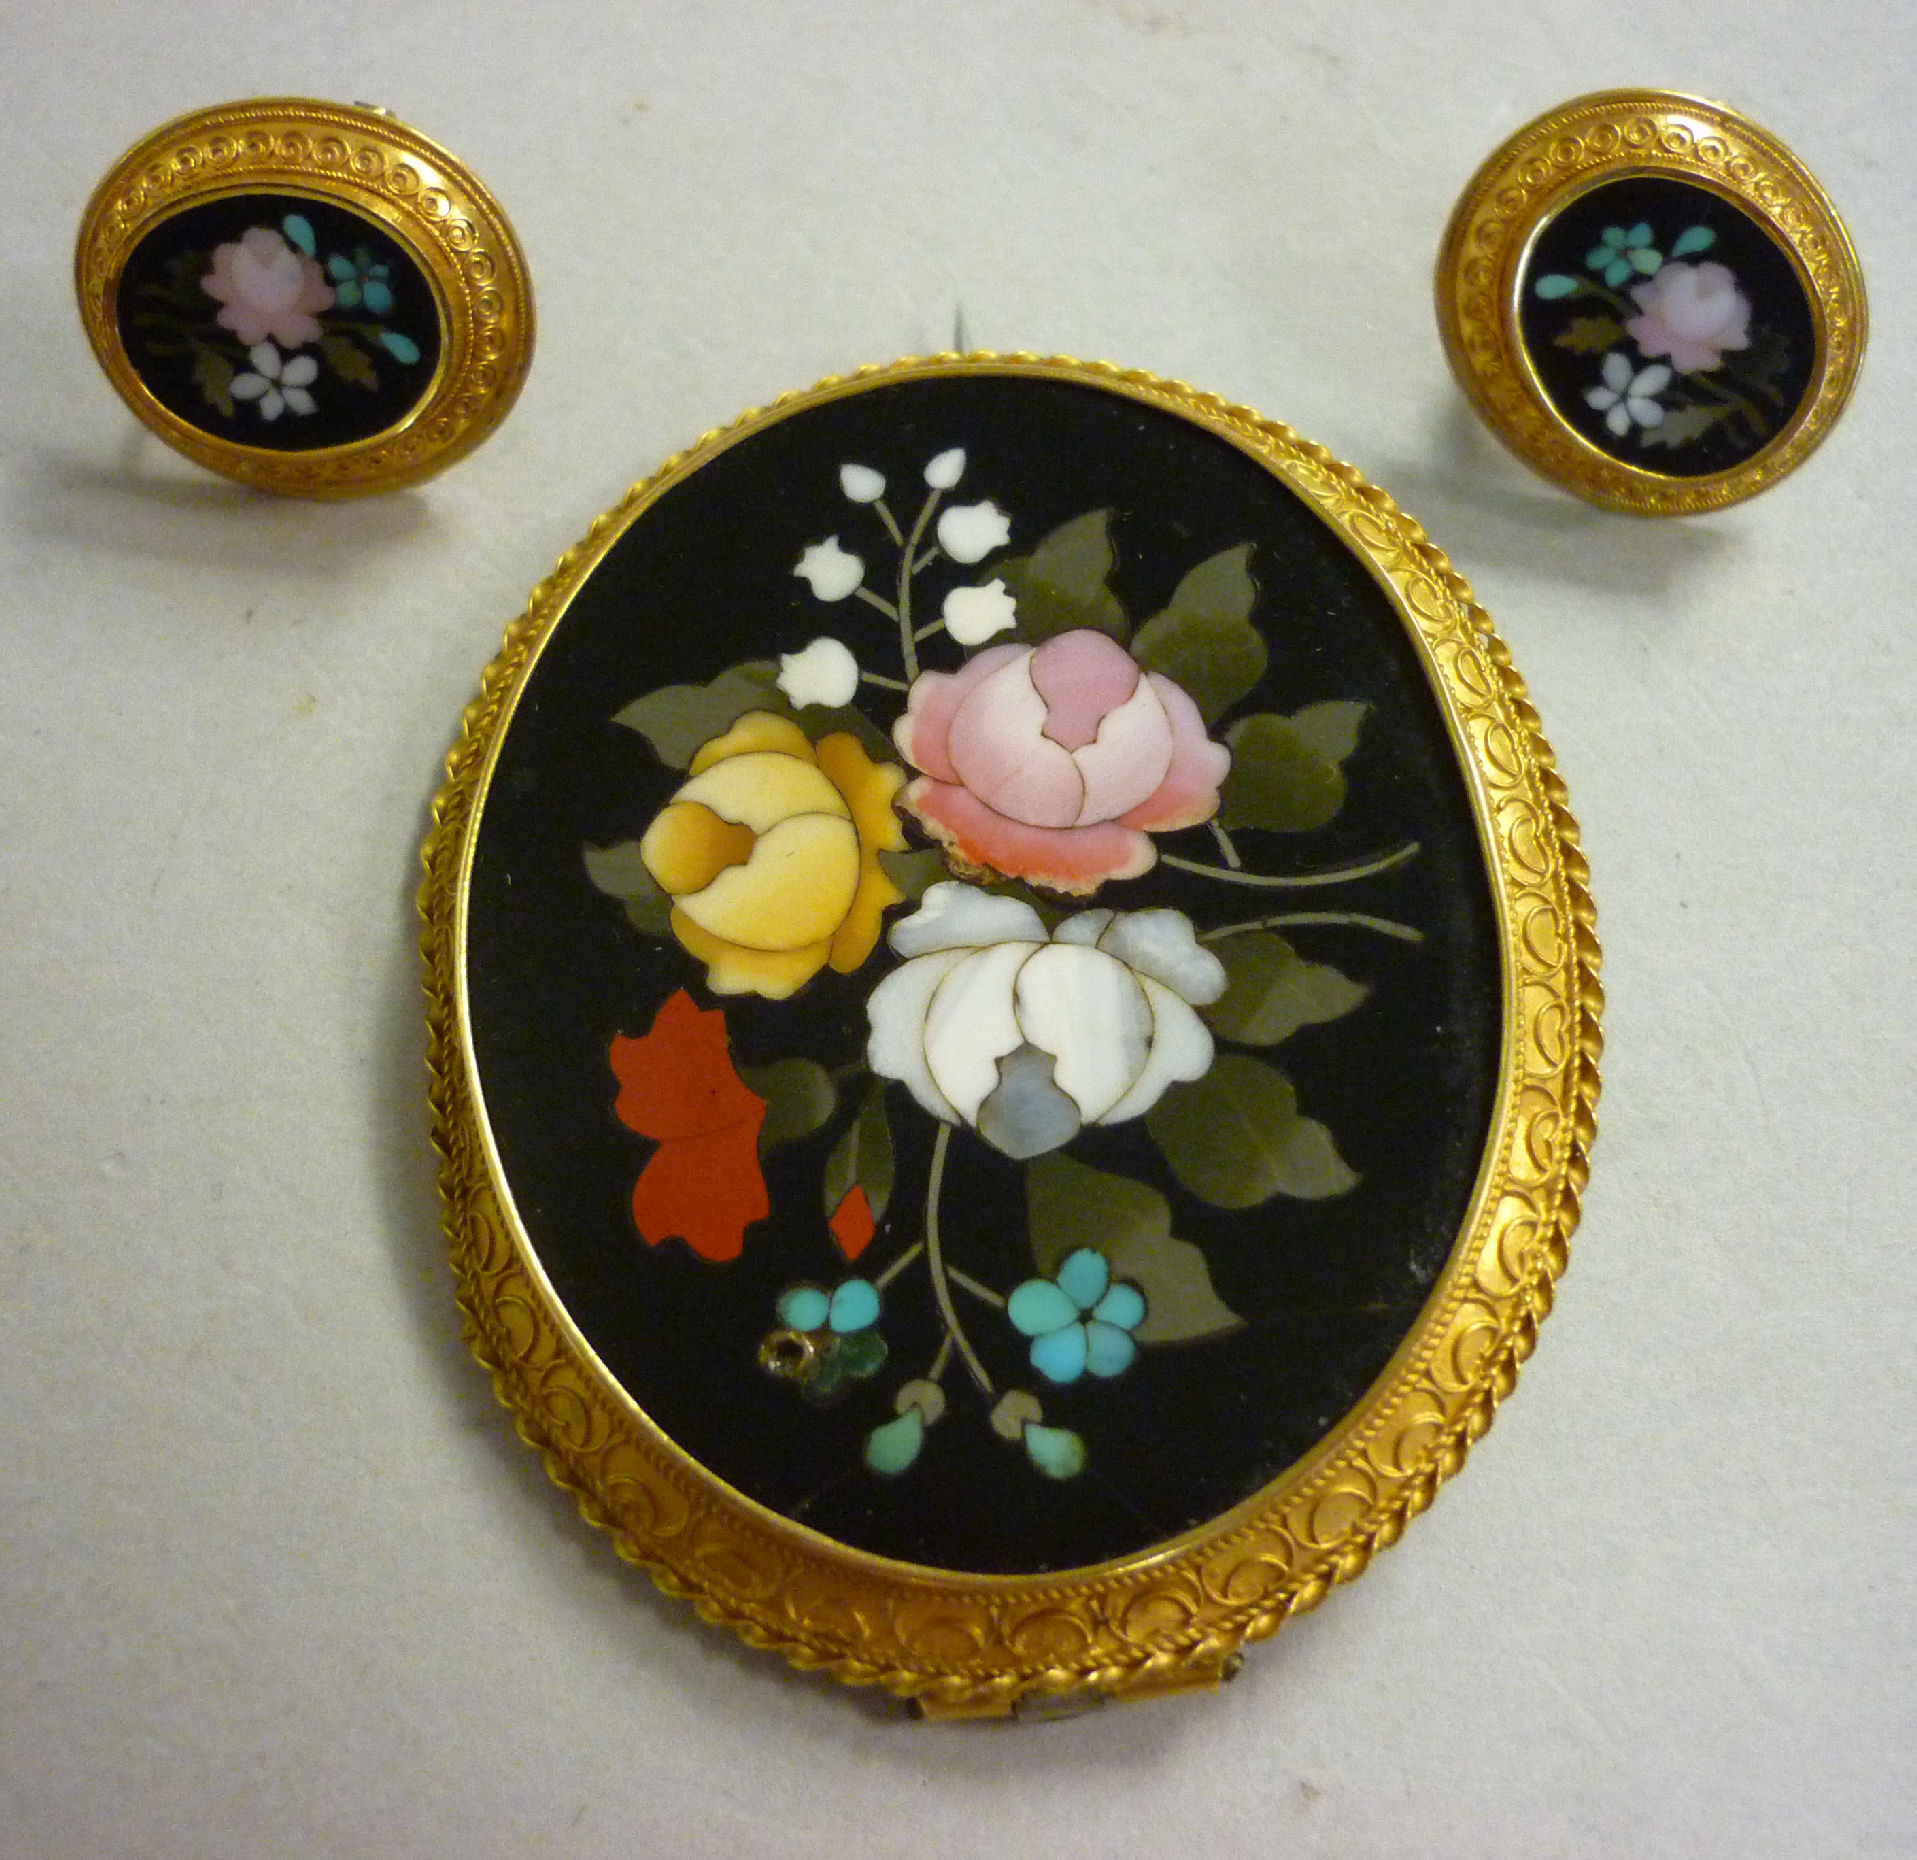 A 9ct overlaid wireworked oval framed brooch, set with an inlaid floral hardstone tablet with a pair